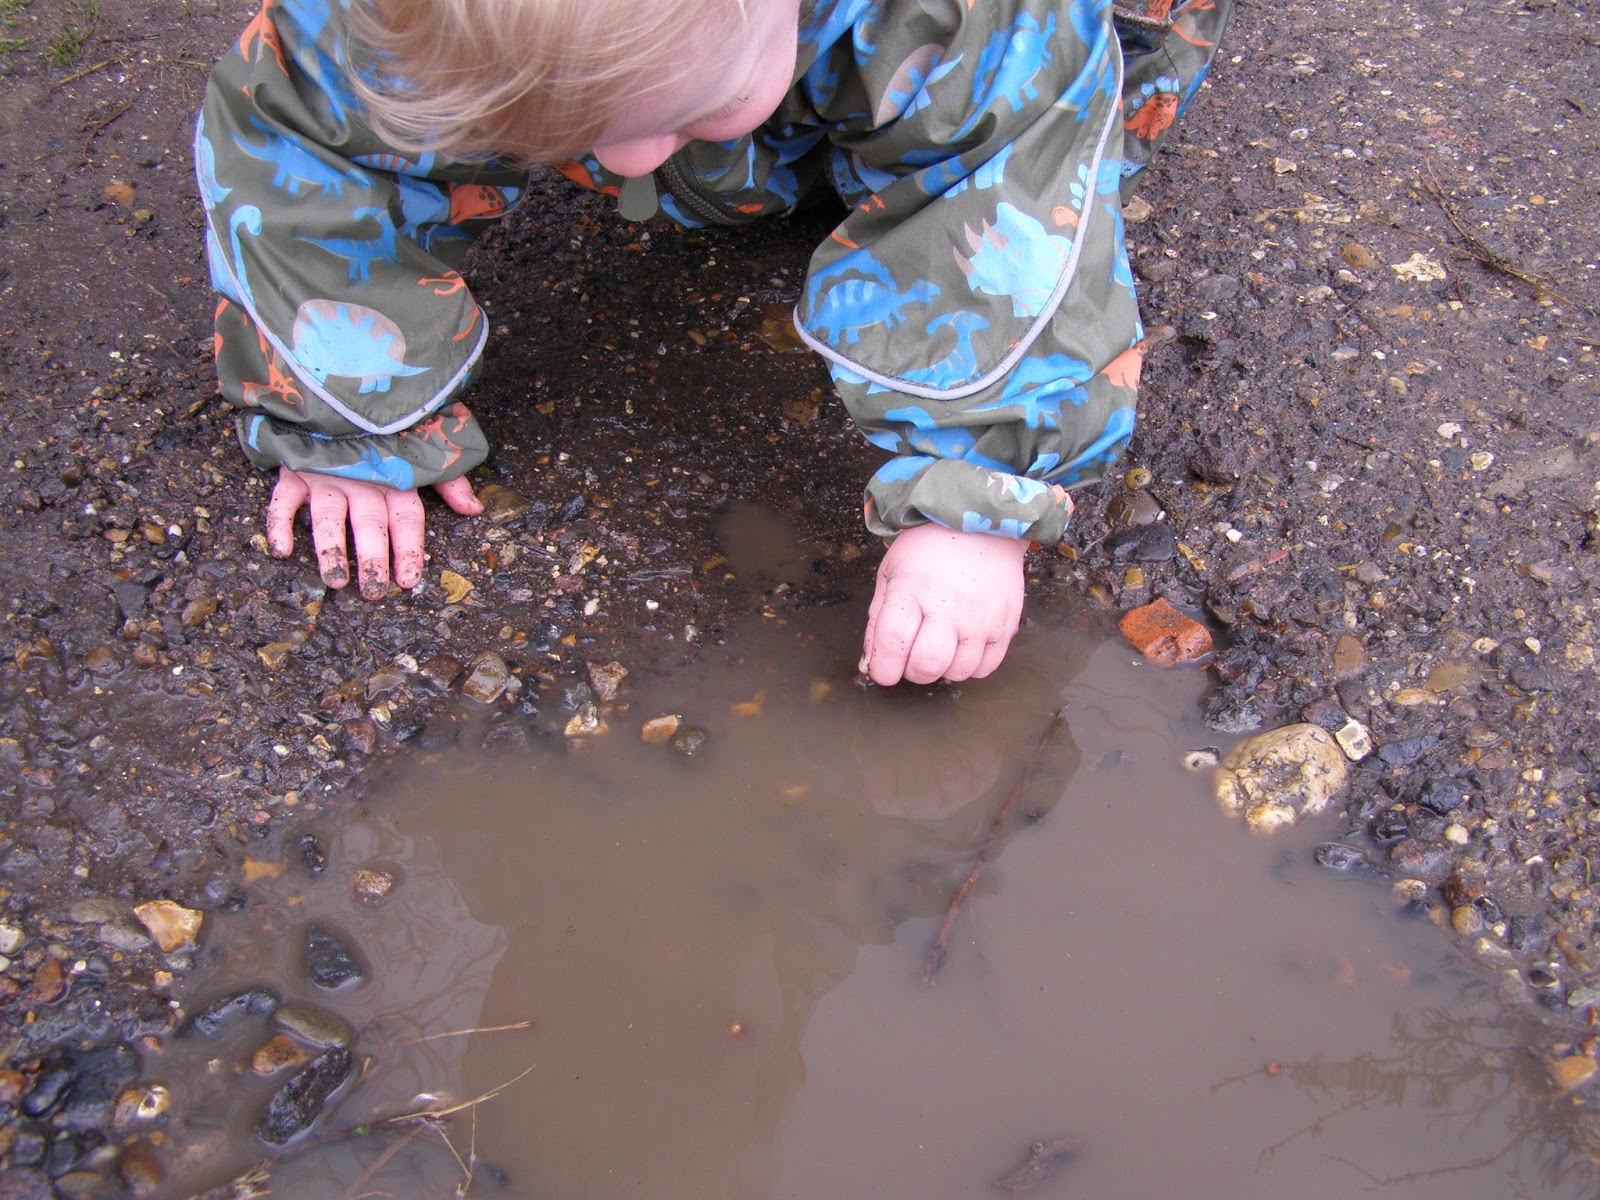 Mud Mud Marvellous Mud: Dirty Ditches and Puddle Play - 